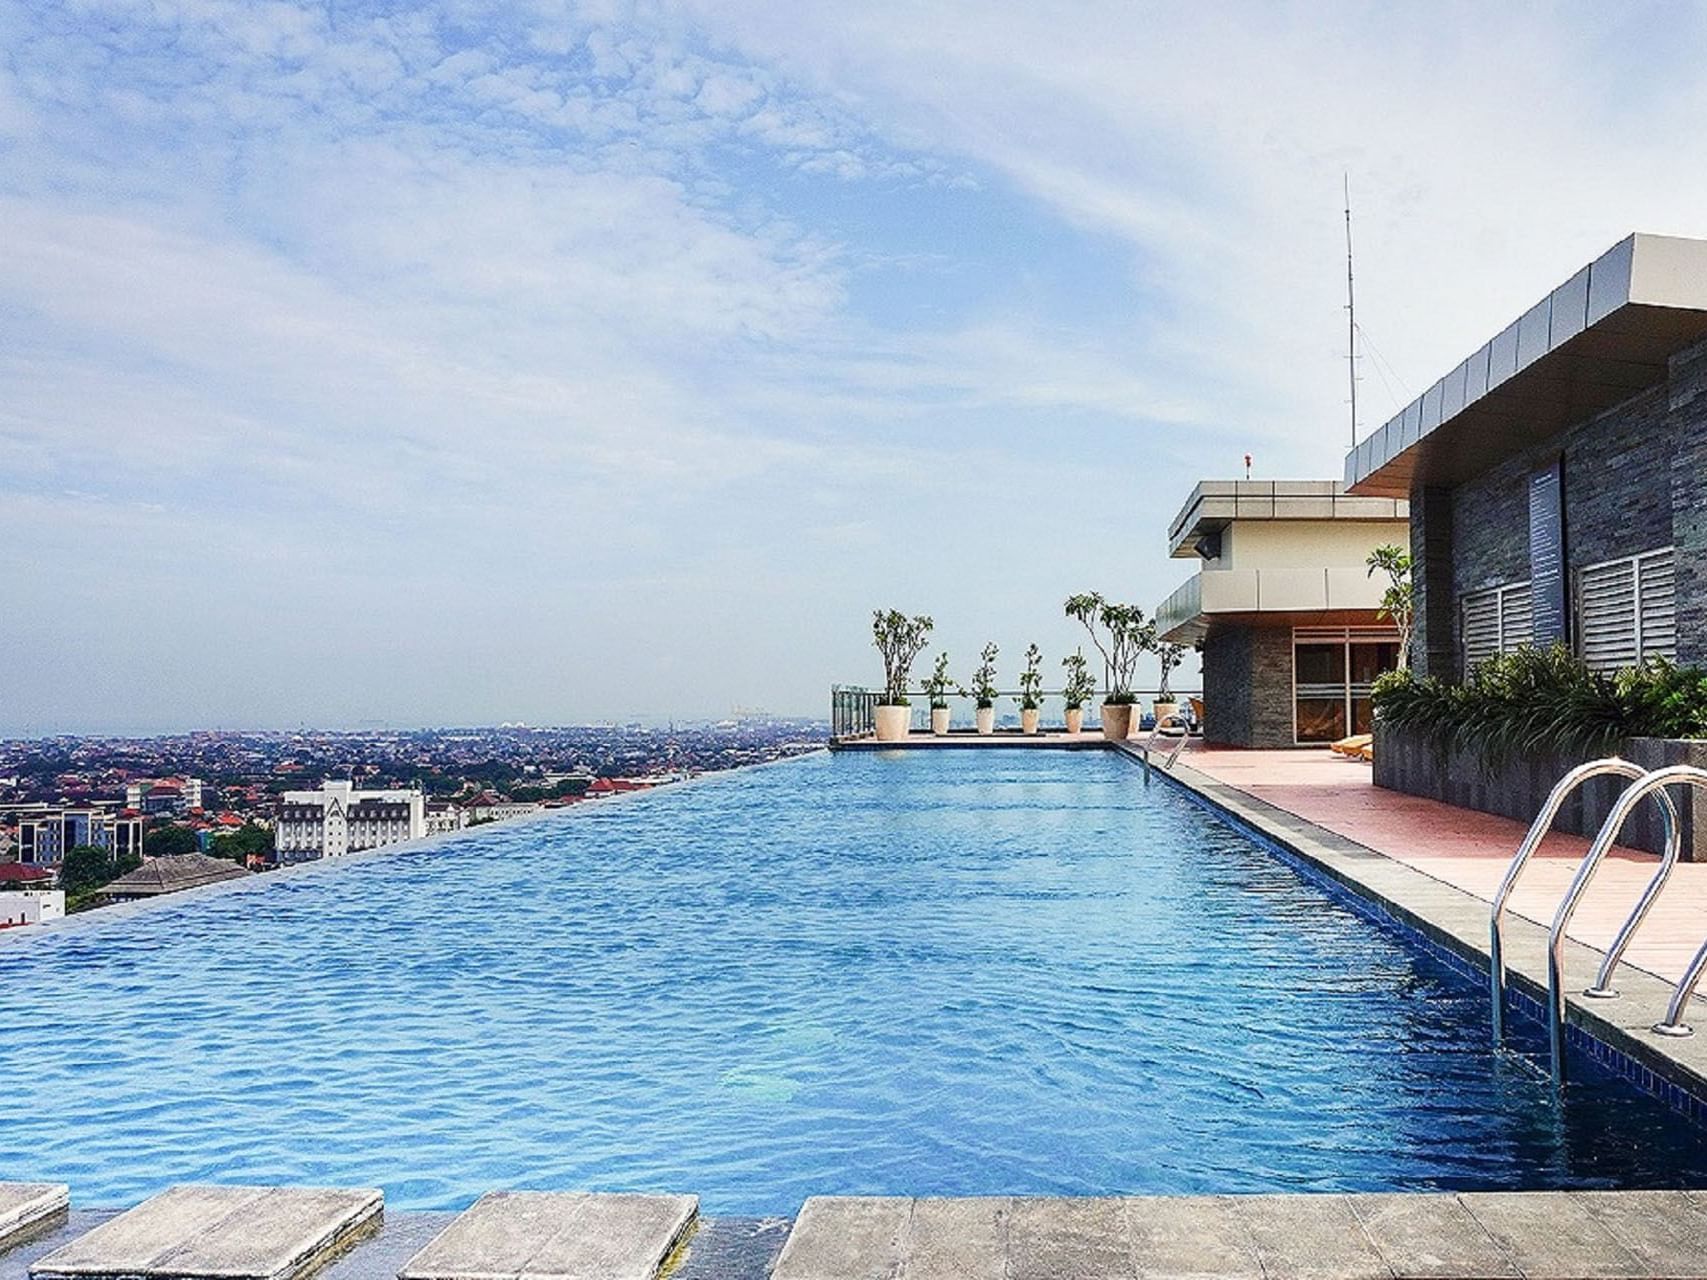 Rooftop Infinity Pool with a city view at LK Pandanaran Hotel & Serviced Apartments